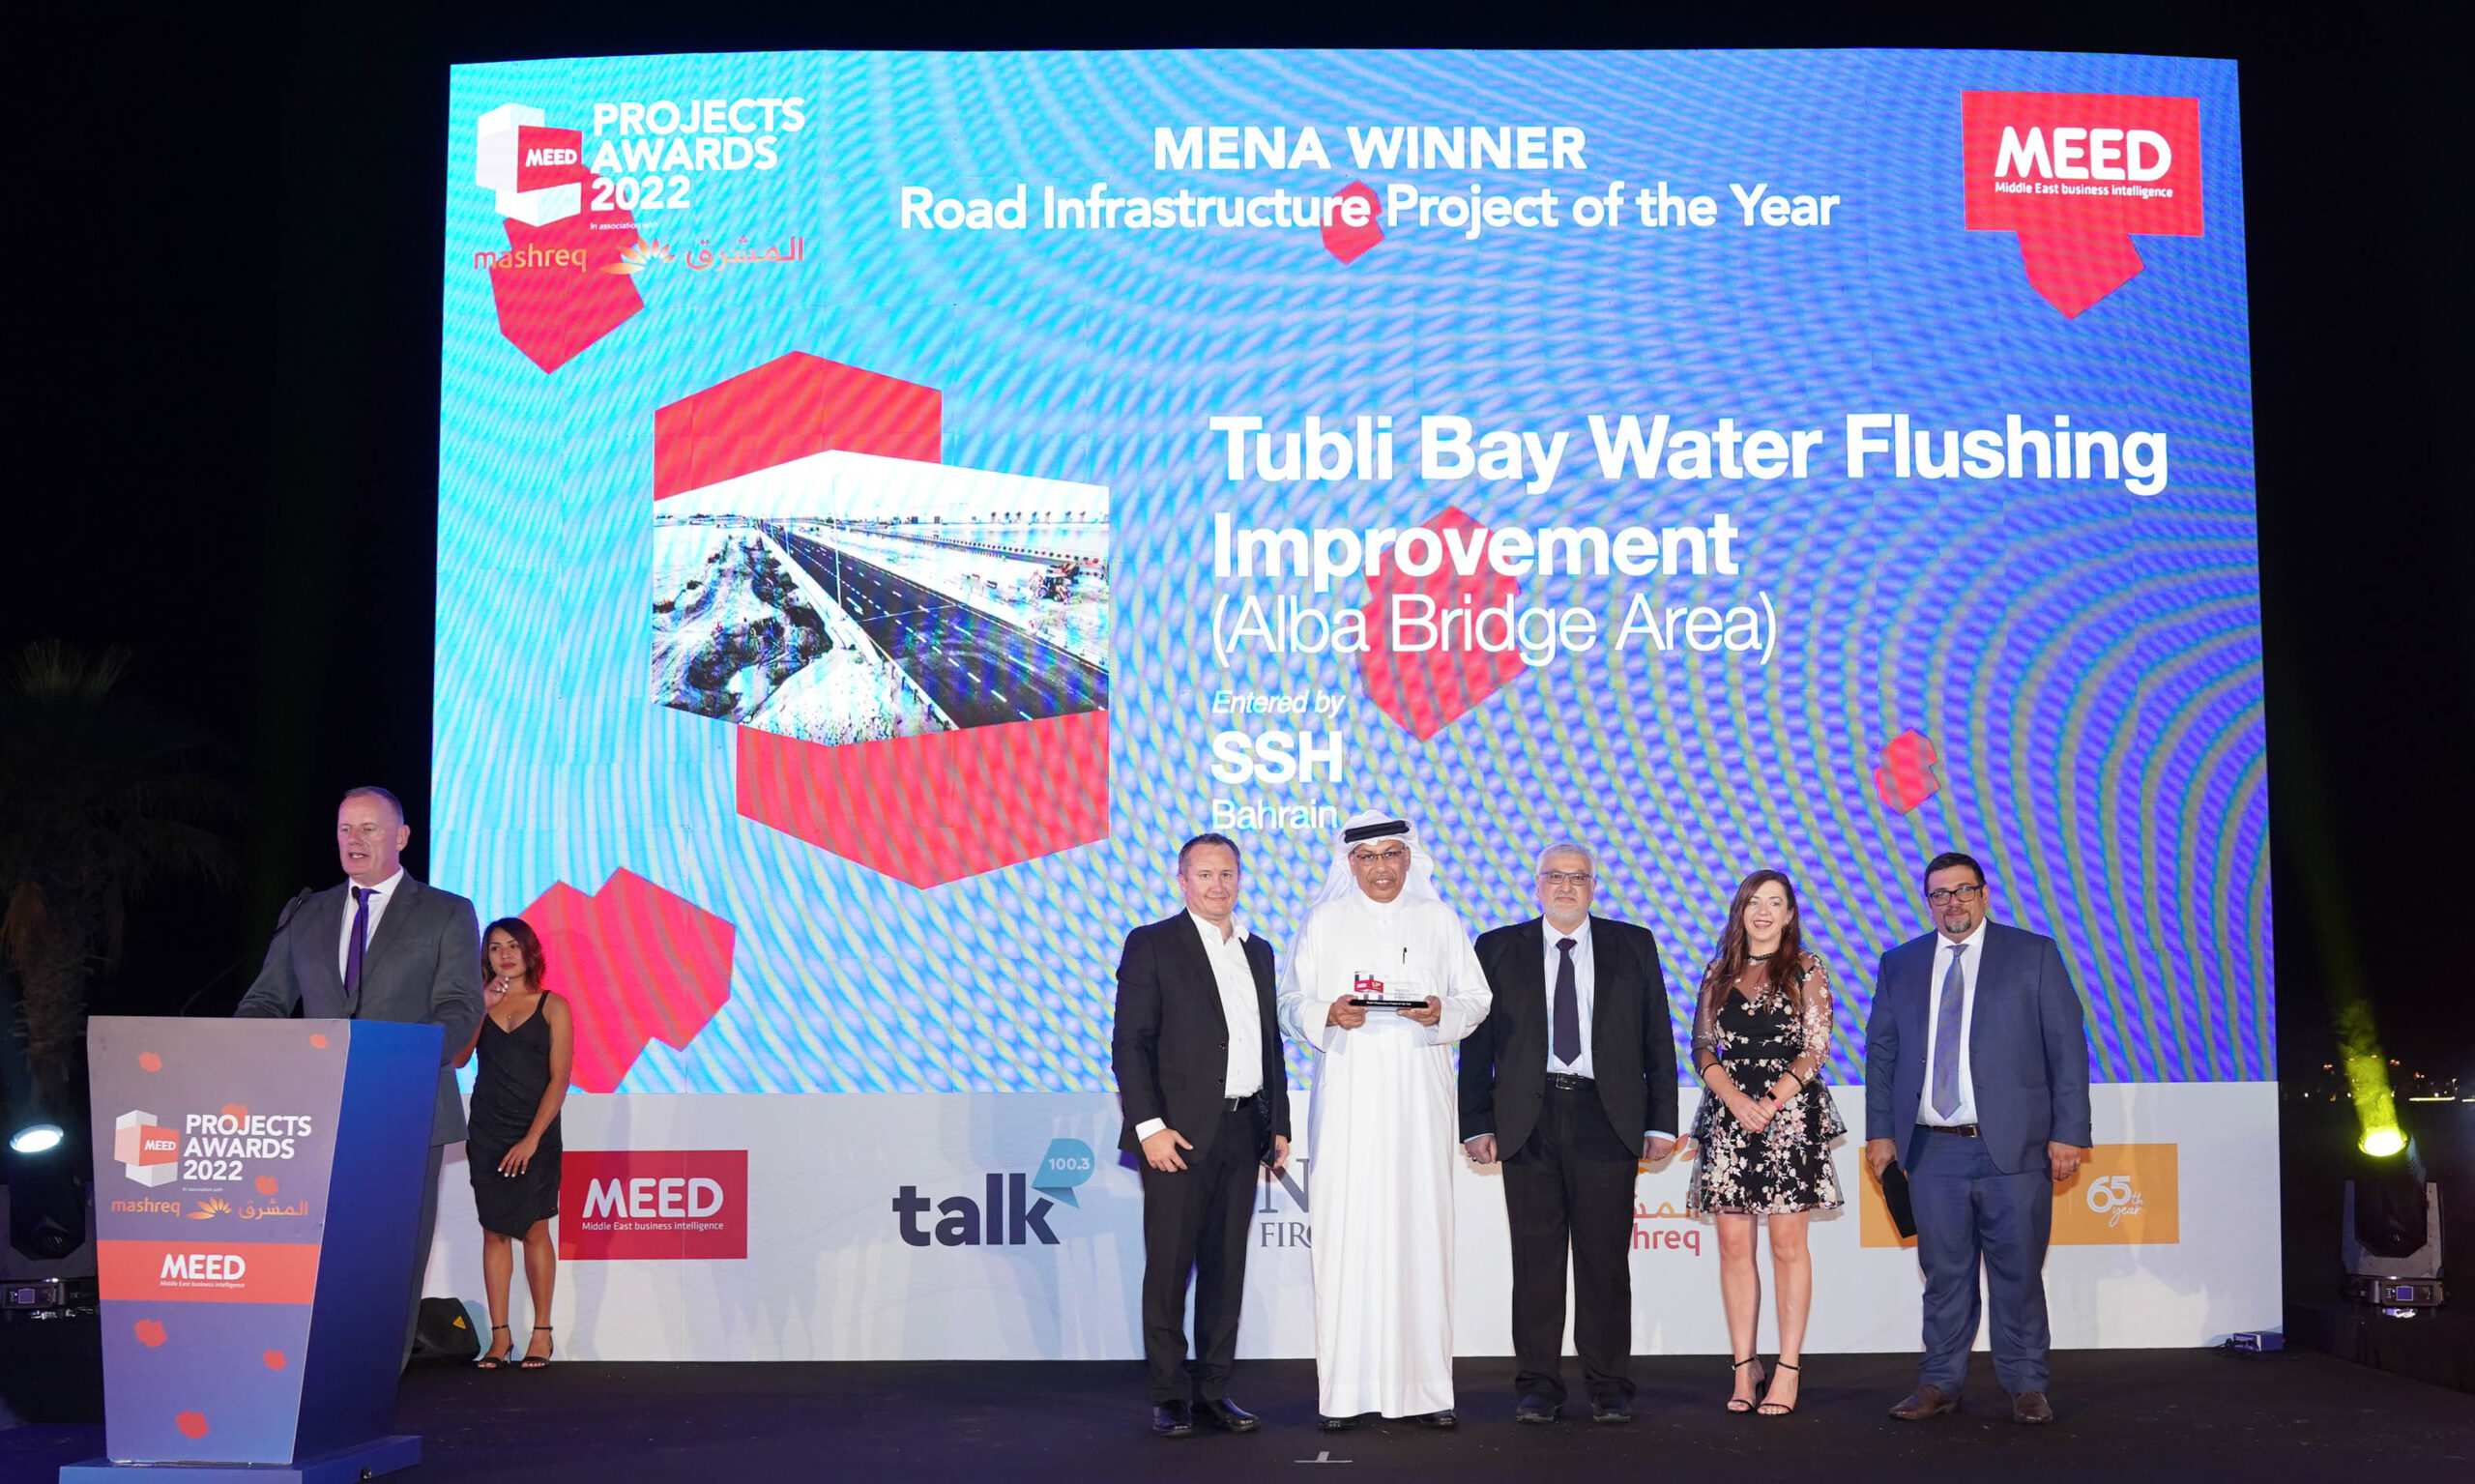 SSH crowned winner of the MENA Road Infrastructure Project of the Year at the 2022 MEED Project Awards